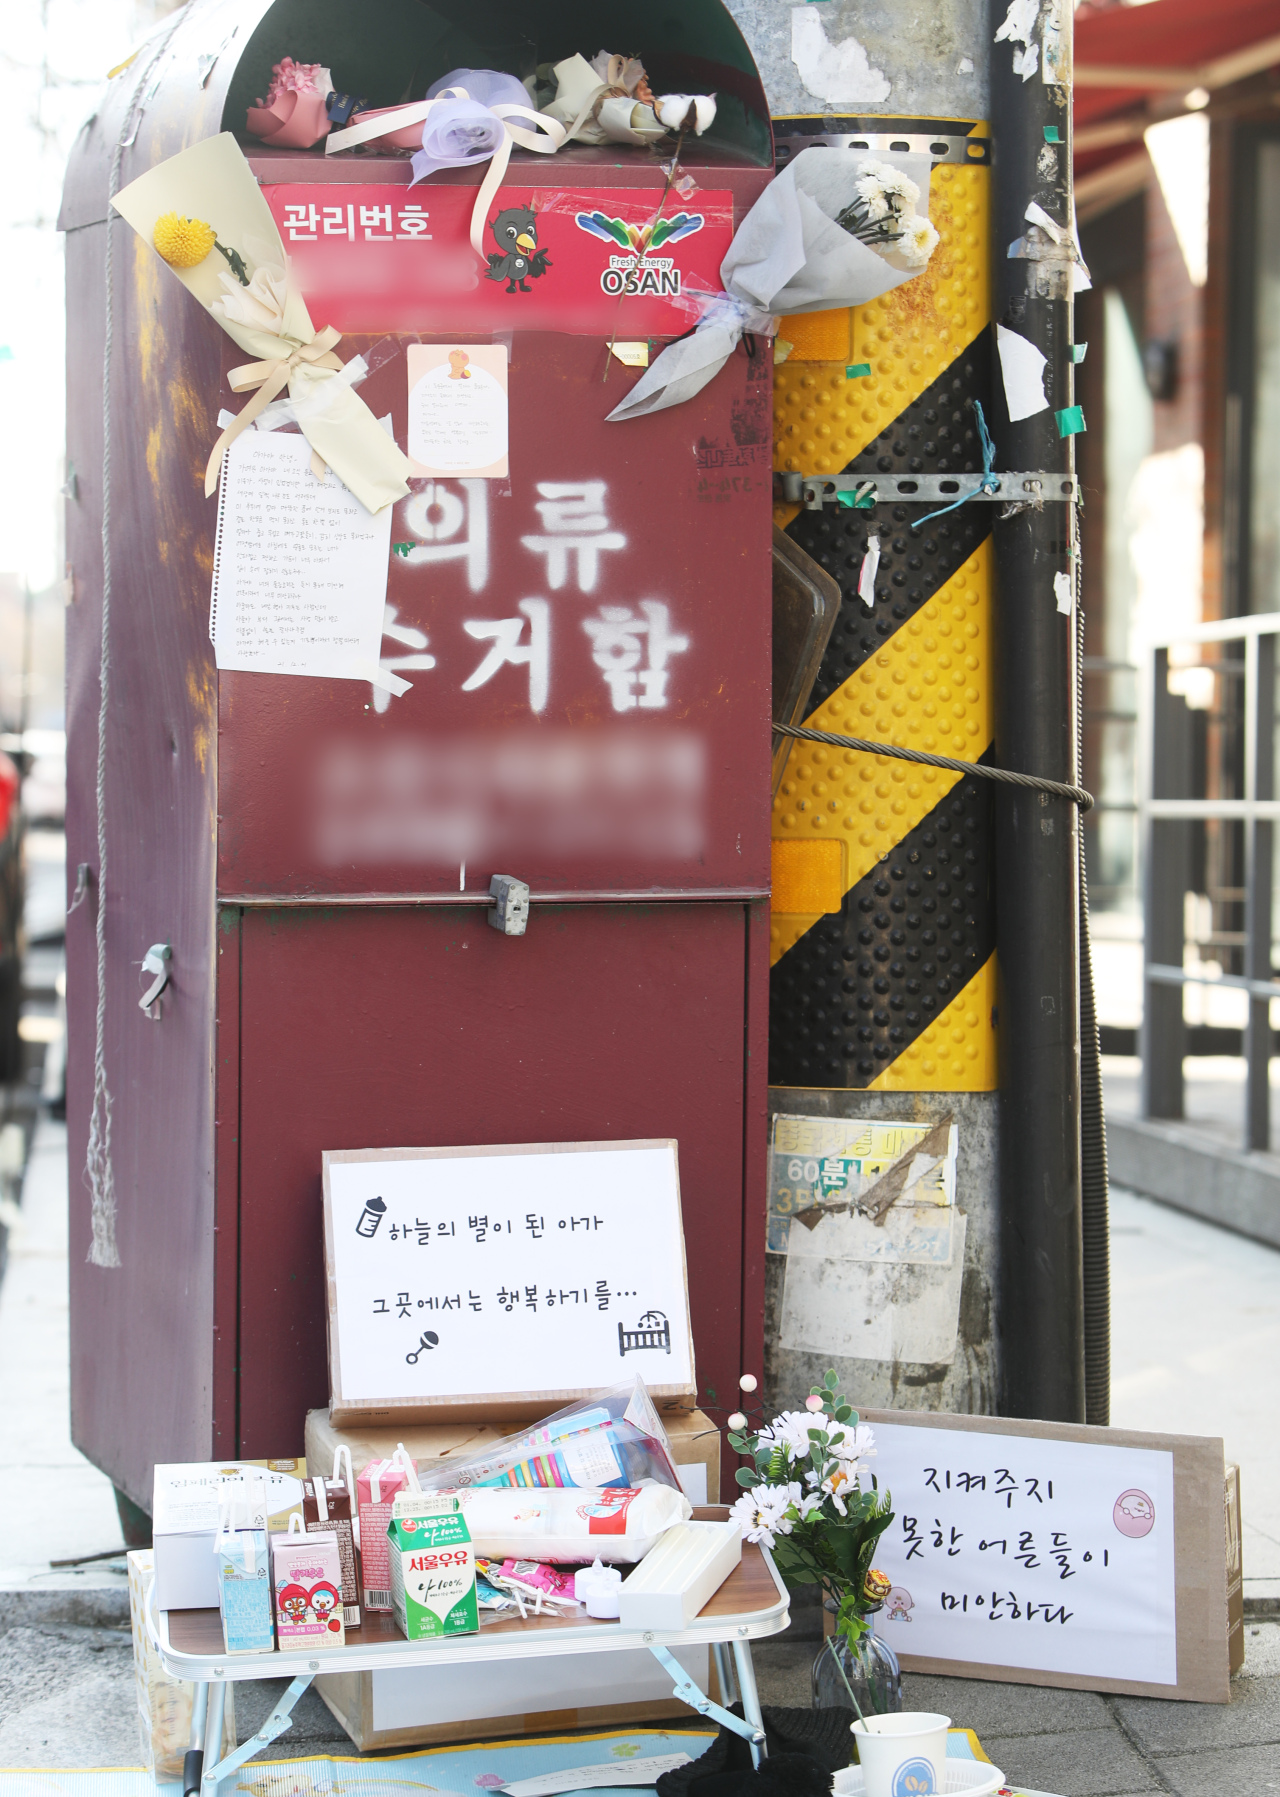 A clothing donation bin in Osan, Gyeonggi Province, where an infant body was found dead on Dec. 18. Yonhap